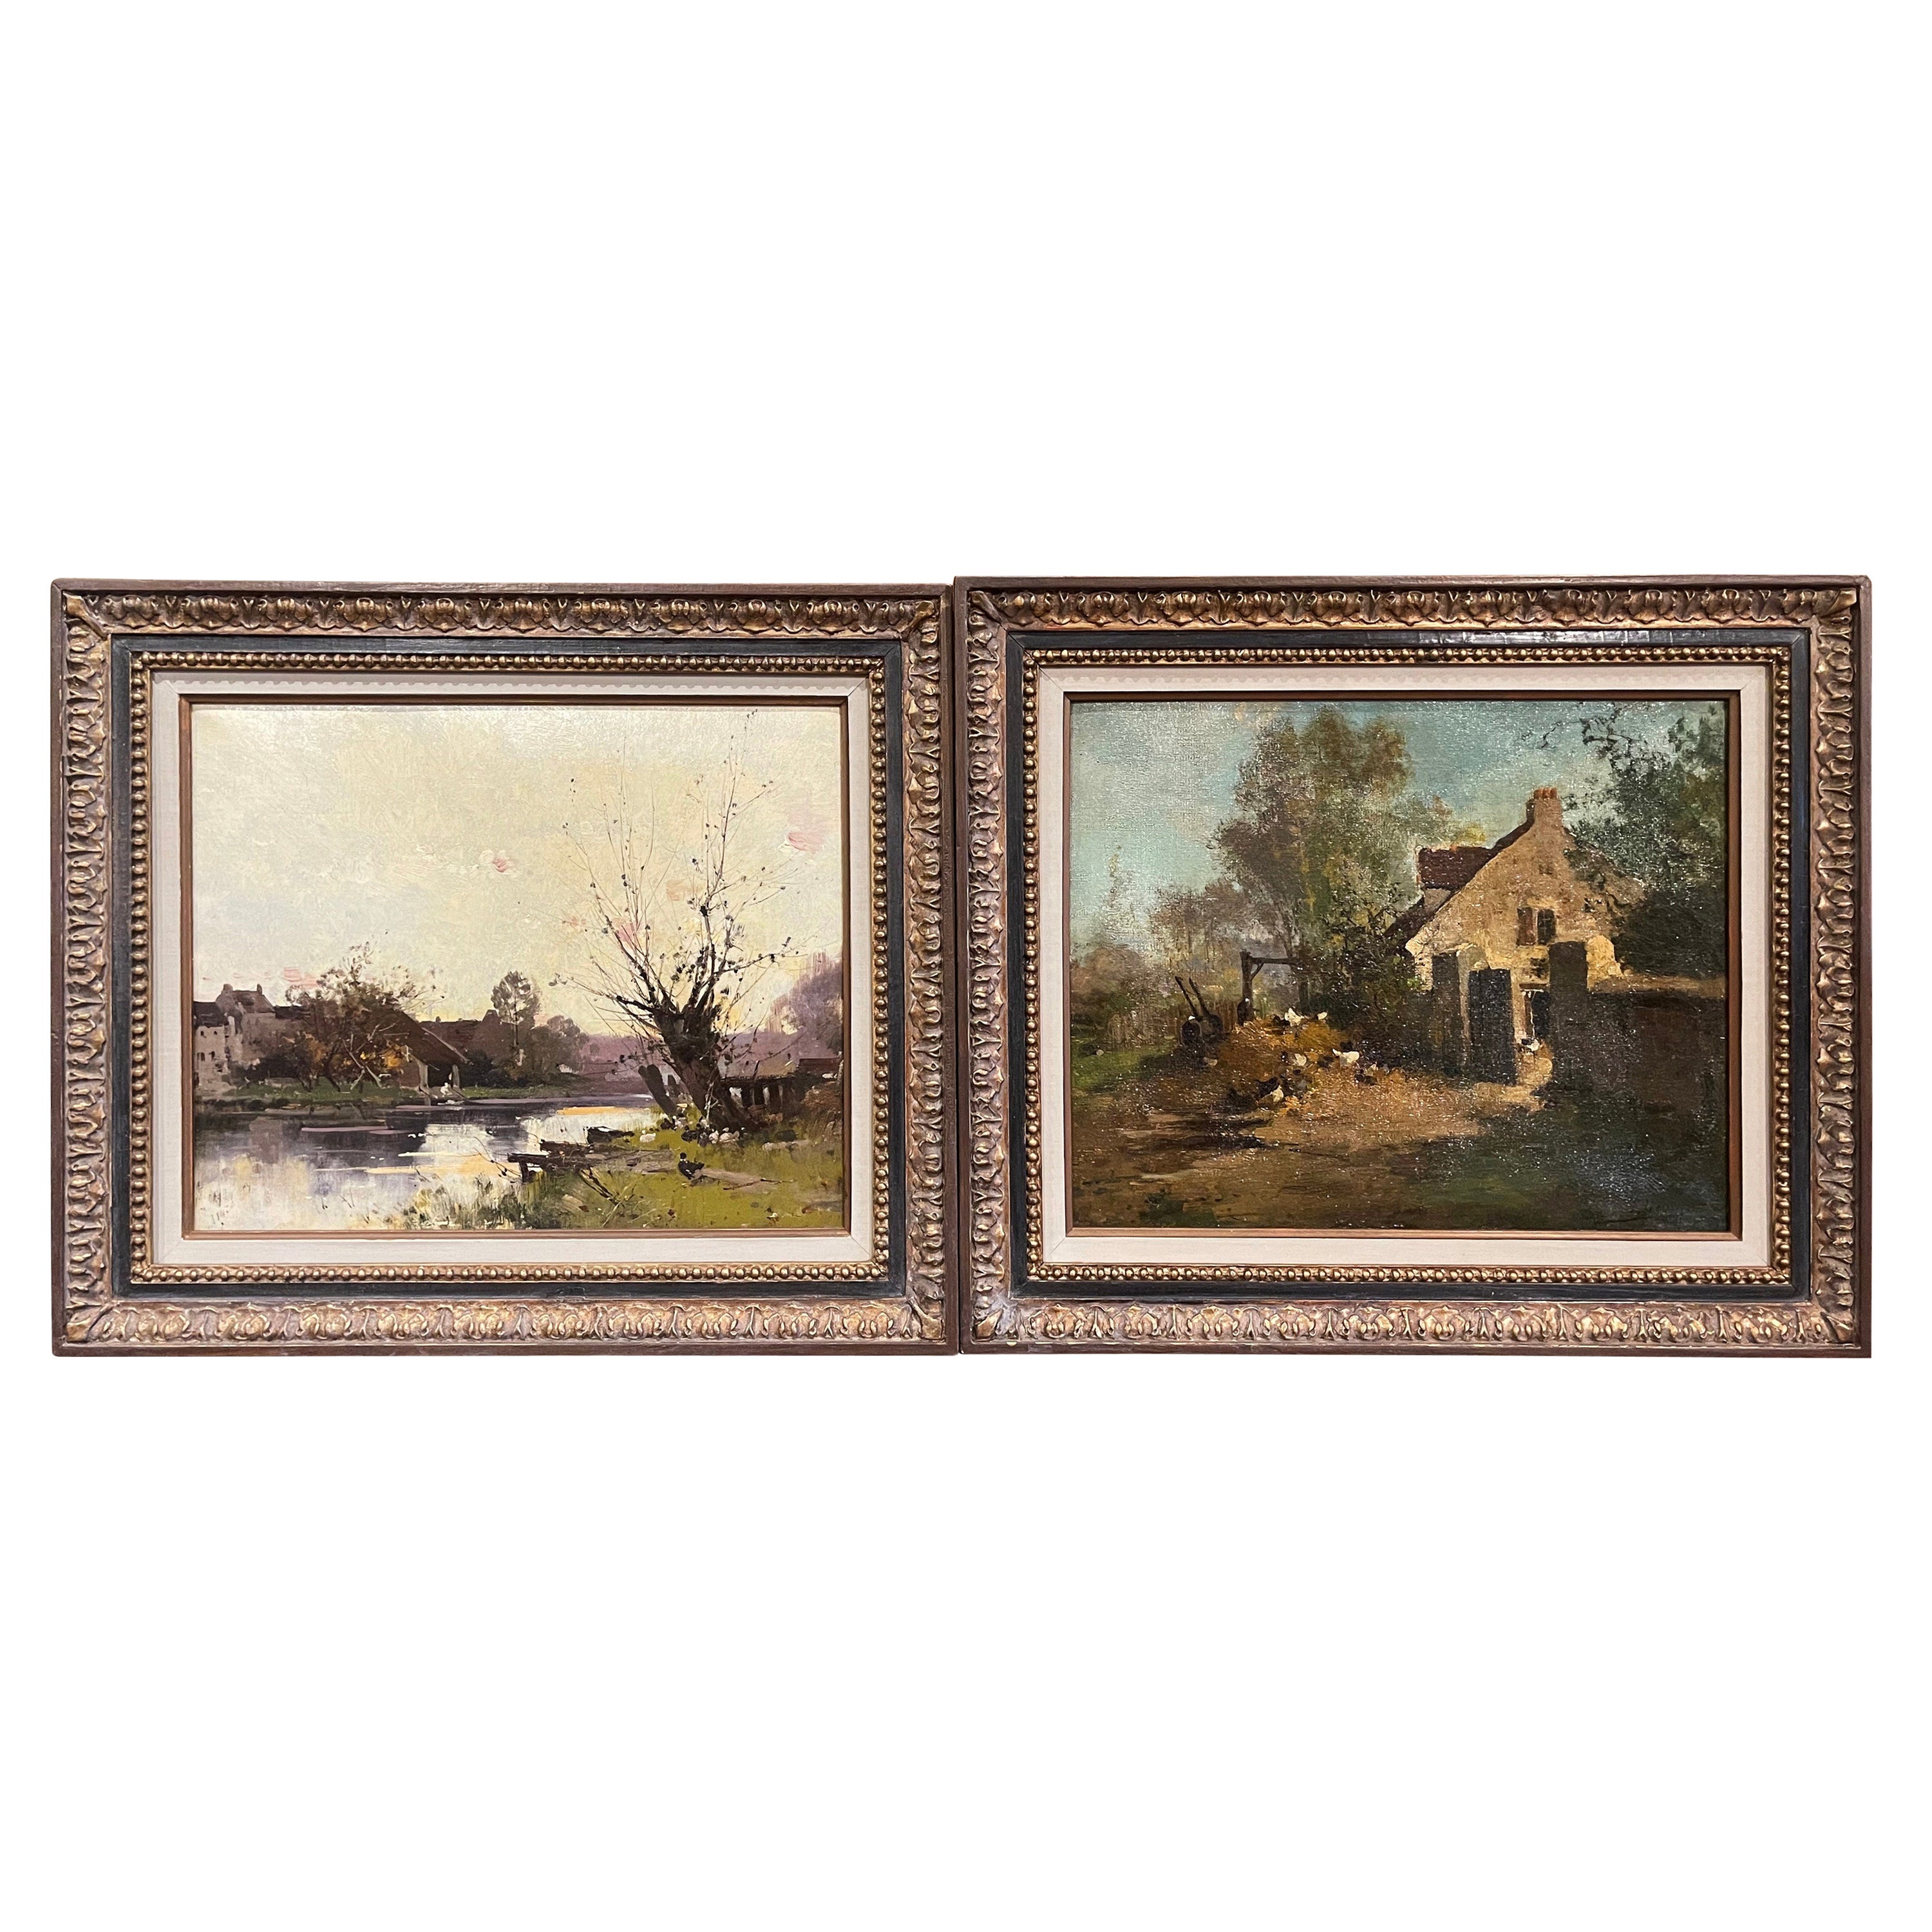 Pair 19th Century Oil Paintings in Gilt Frame Signed Lievin for E. Galien-Laloue